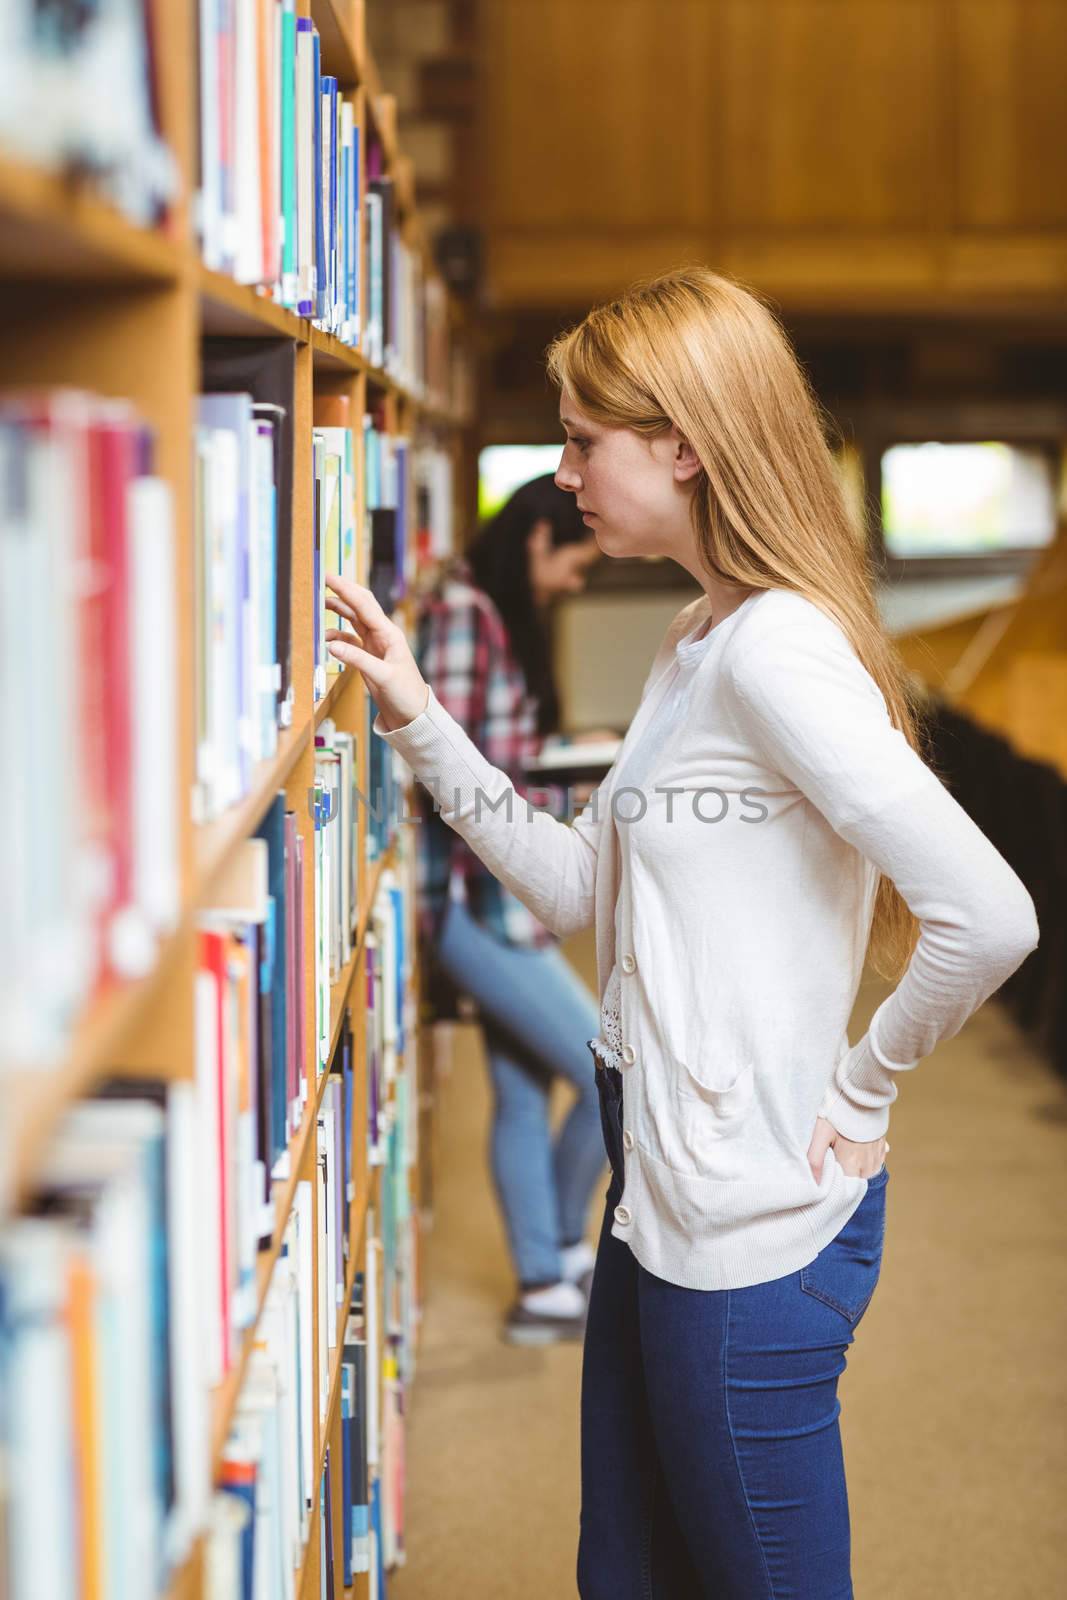 Blond student looking for book in library shelves at the university